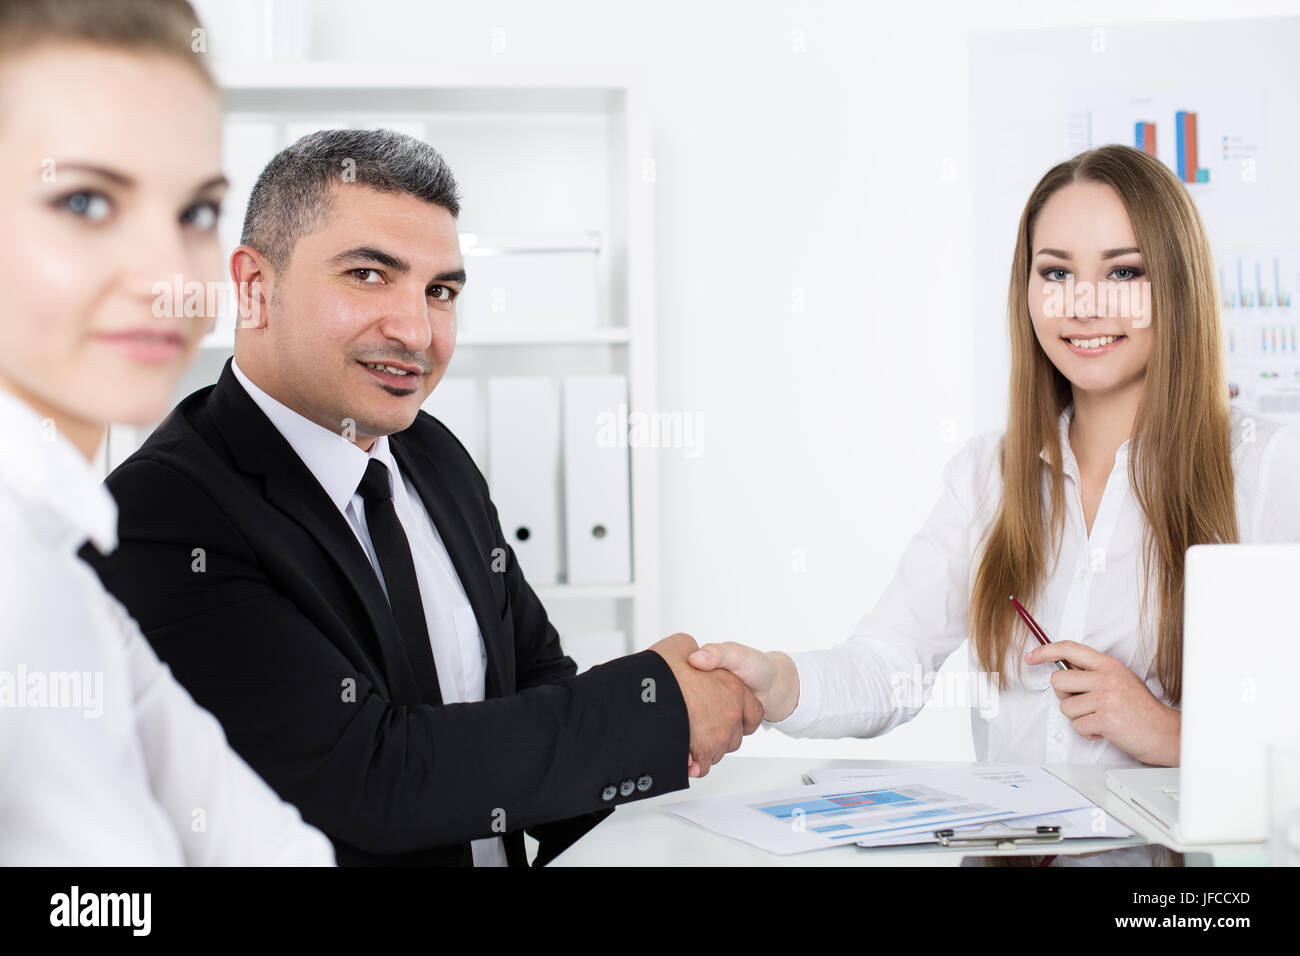 Businessman in suit shaking young business woman's hand. Partners made deal and sealed it with handclasp. Formal greeting gesture Stock Photo